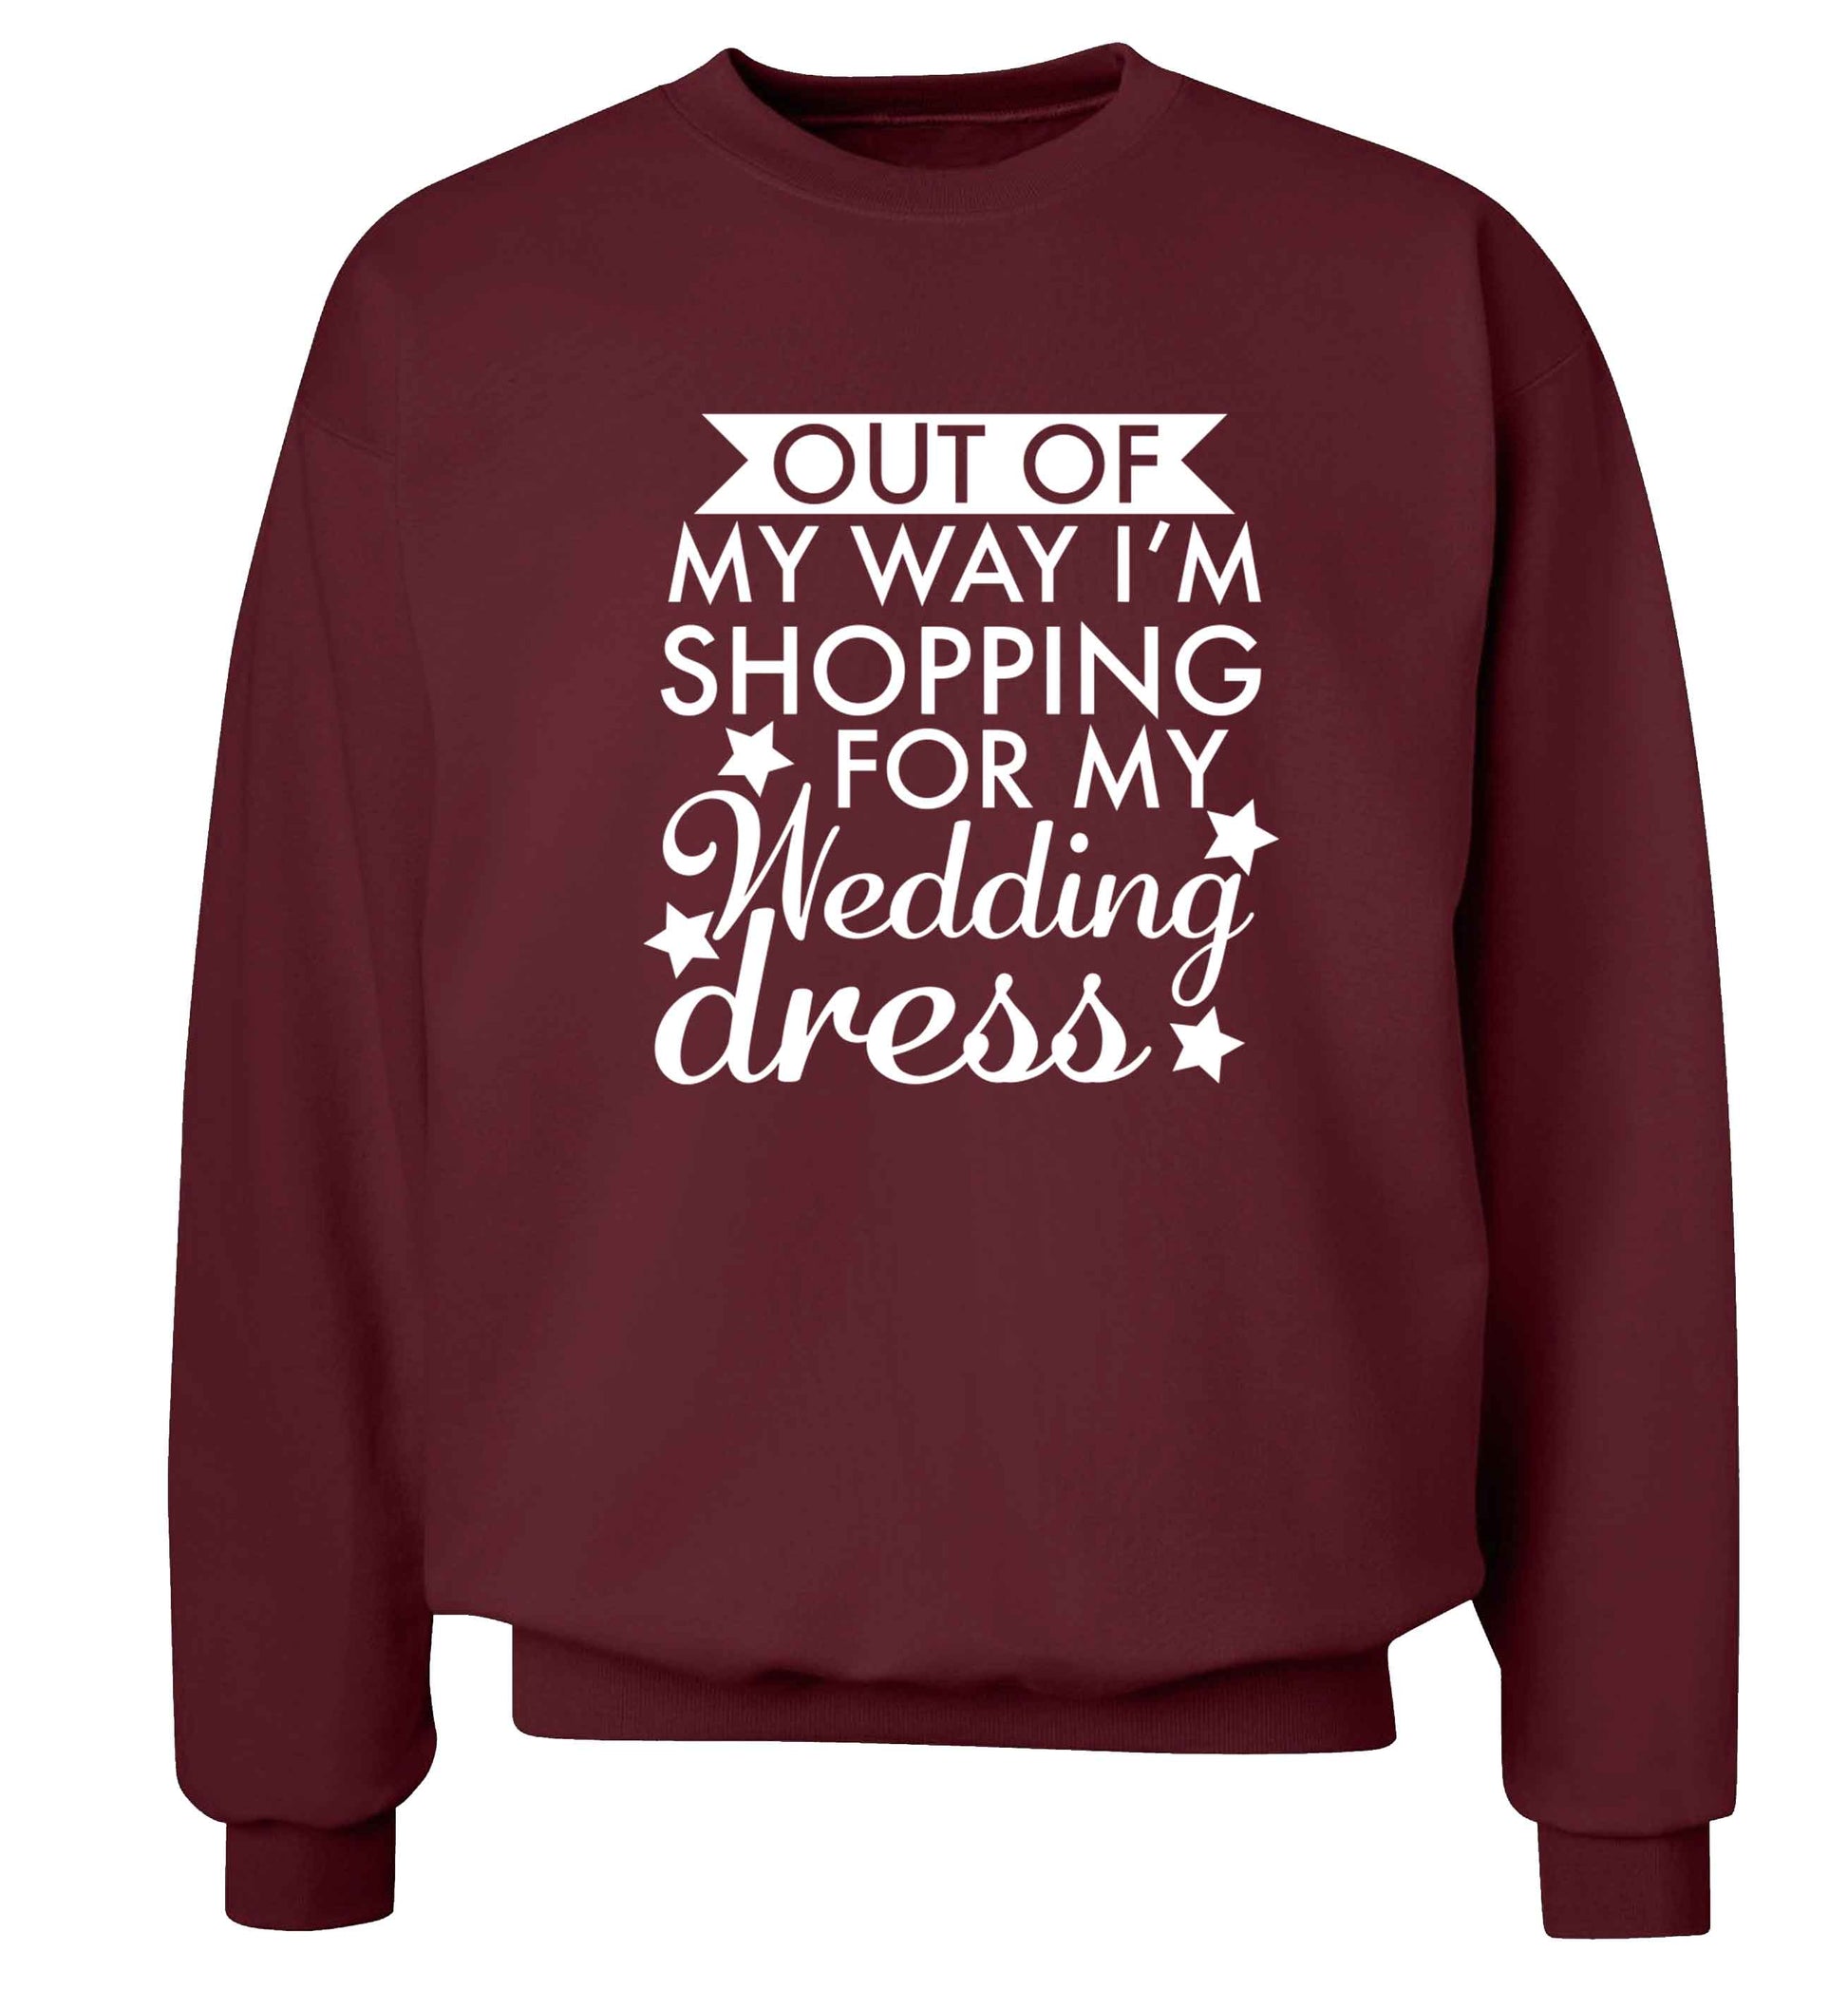 Out of my way I'm shopping for my wedding dress adult's unisex maroon sweater 2XL